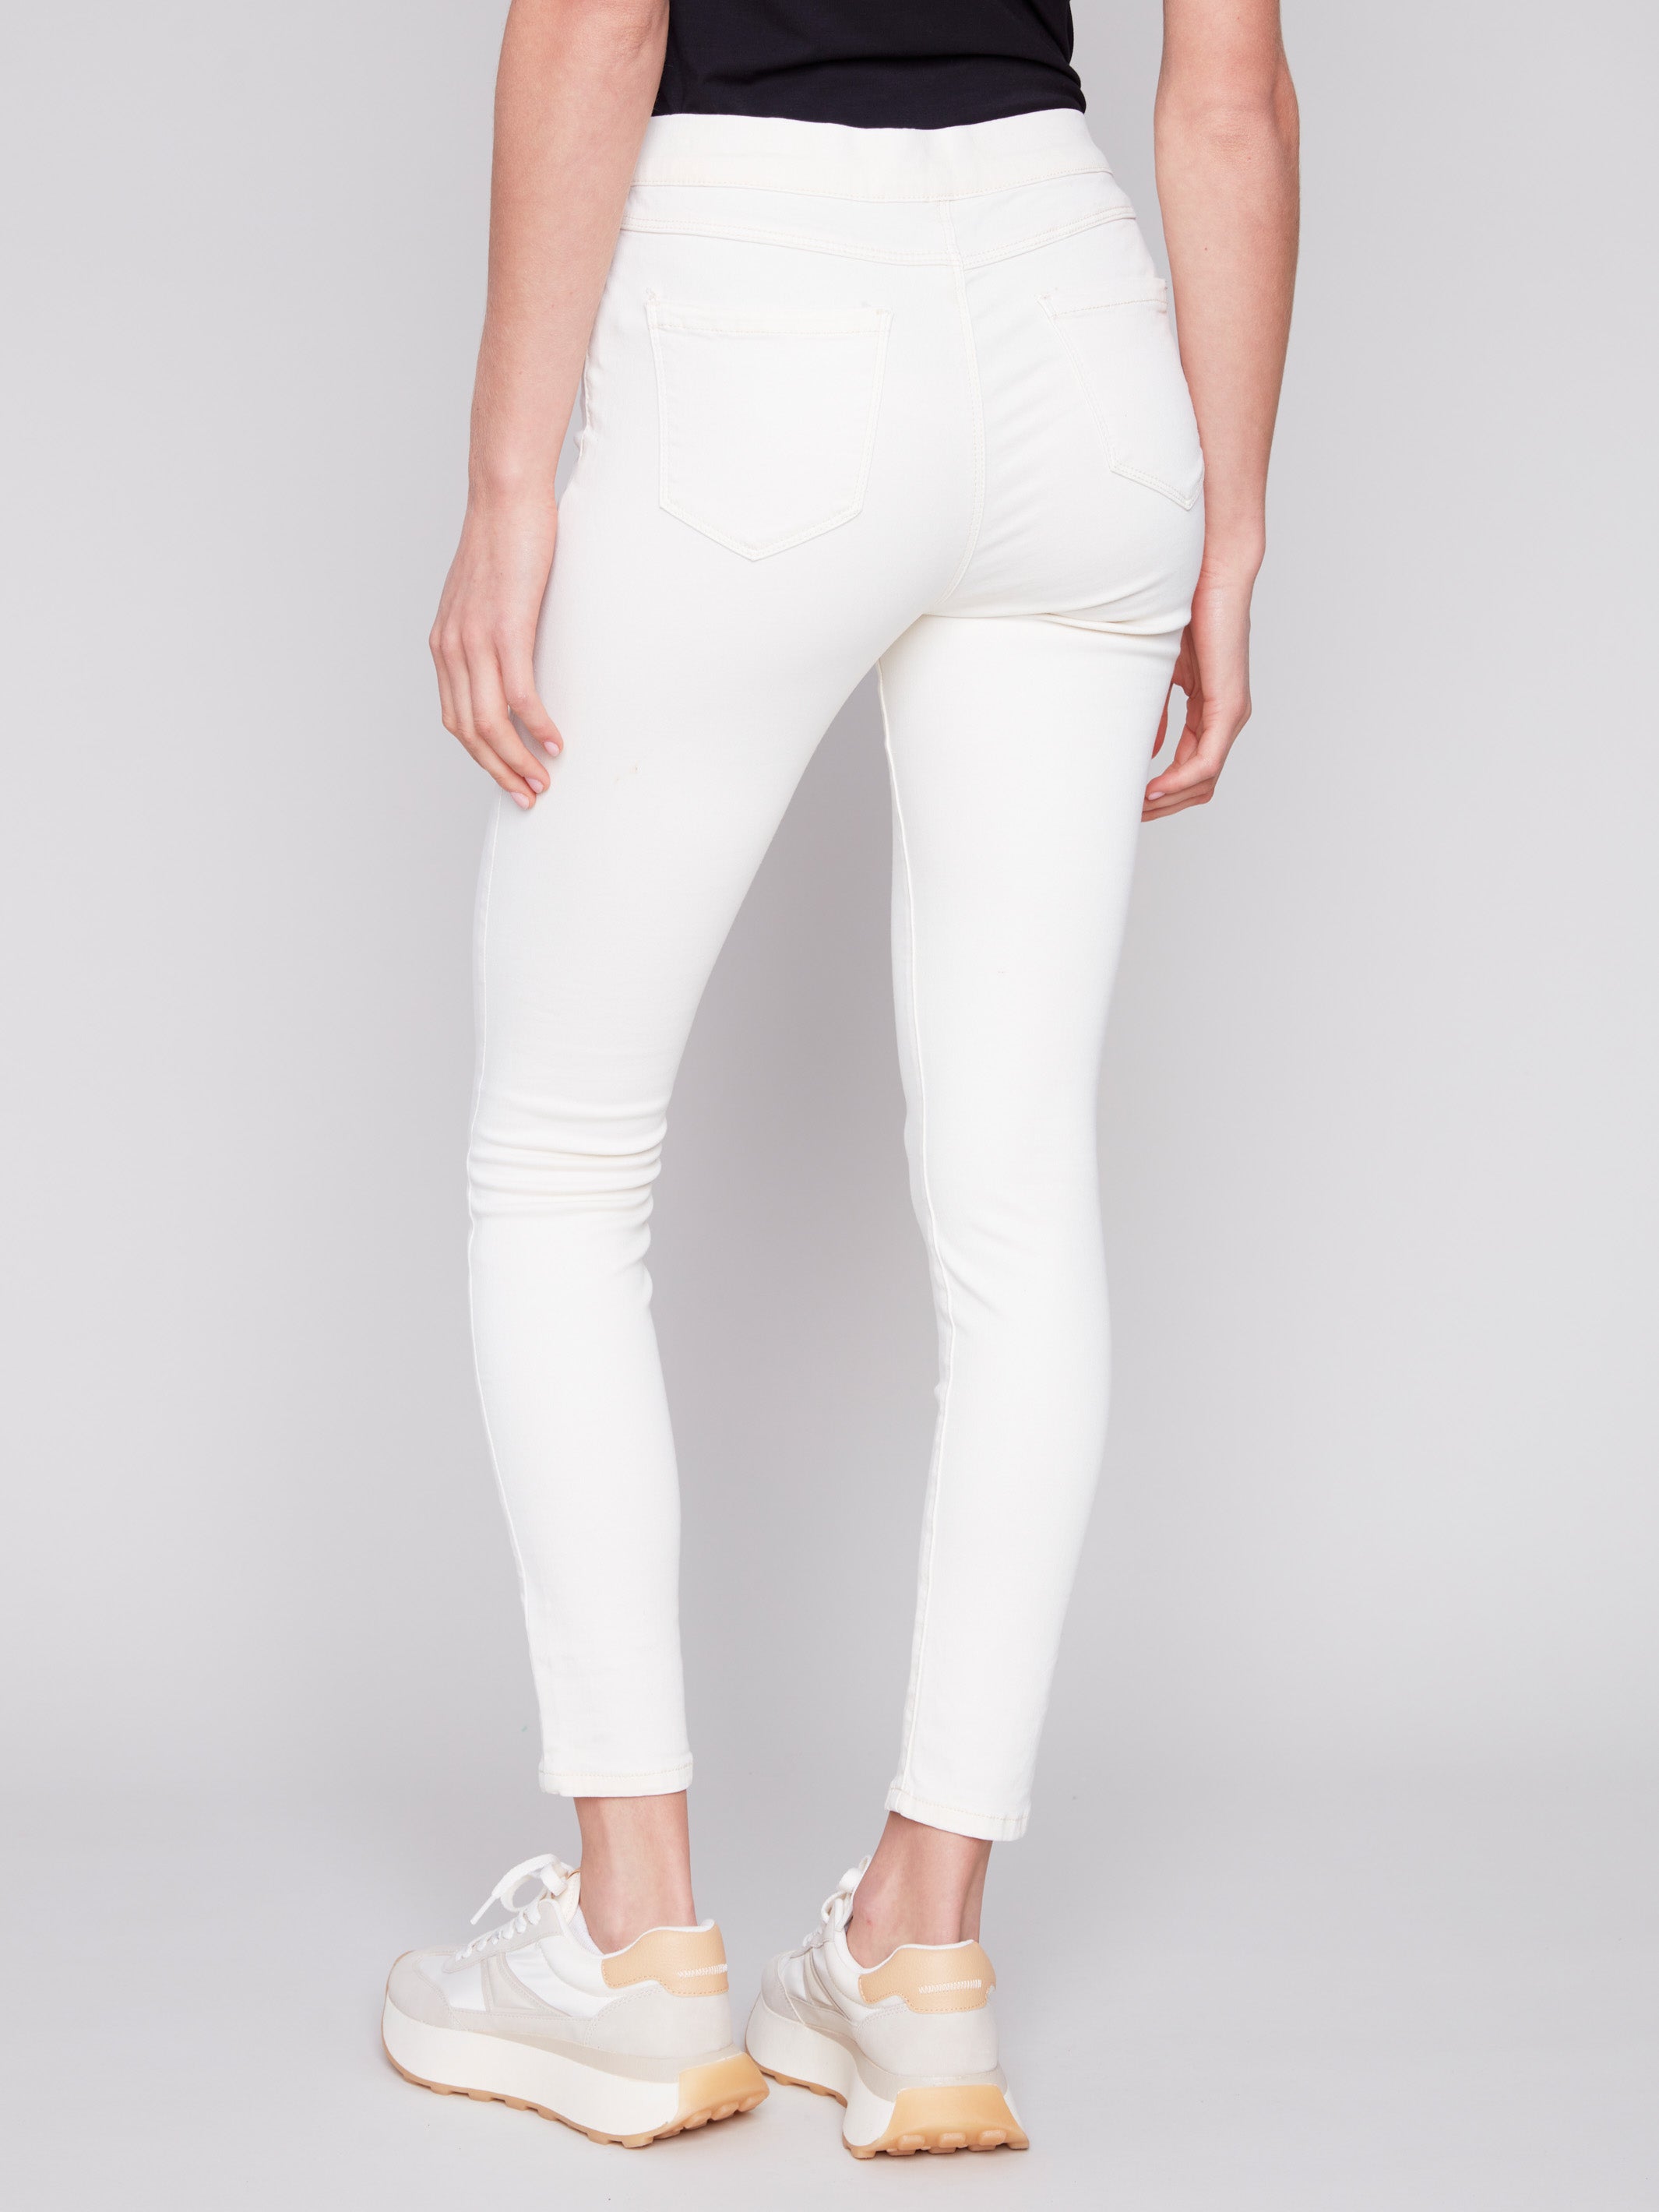 Twill Pull-On Pants - Natural - Charlie B Collection Canada - Image 3